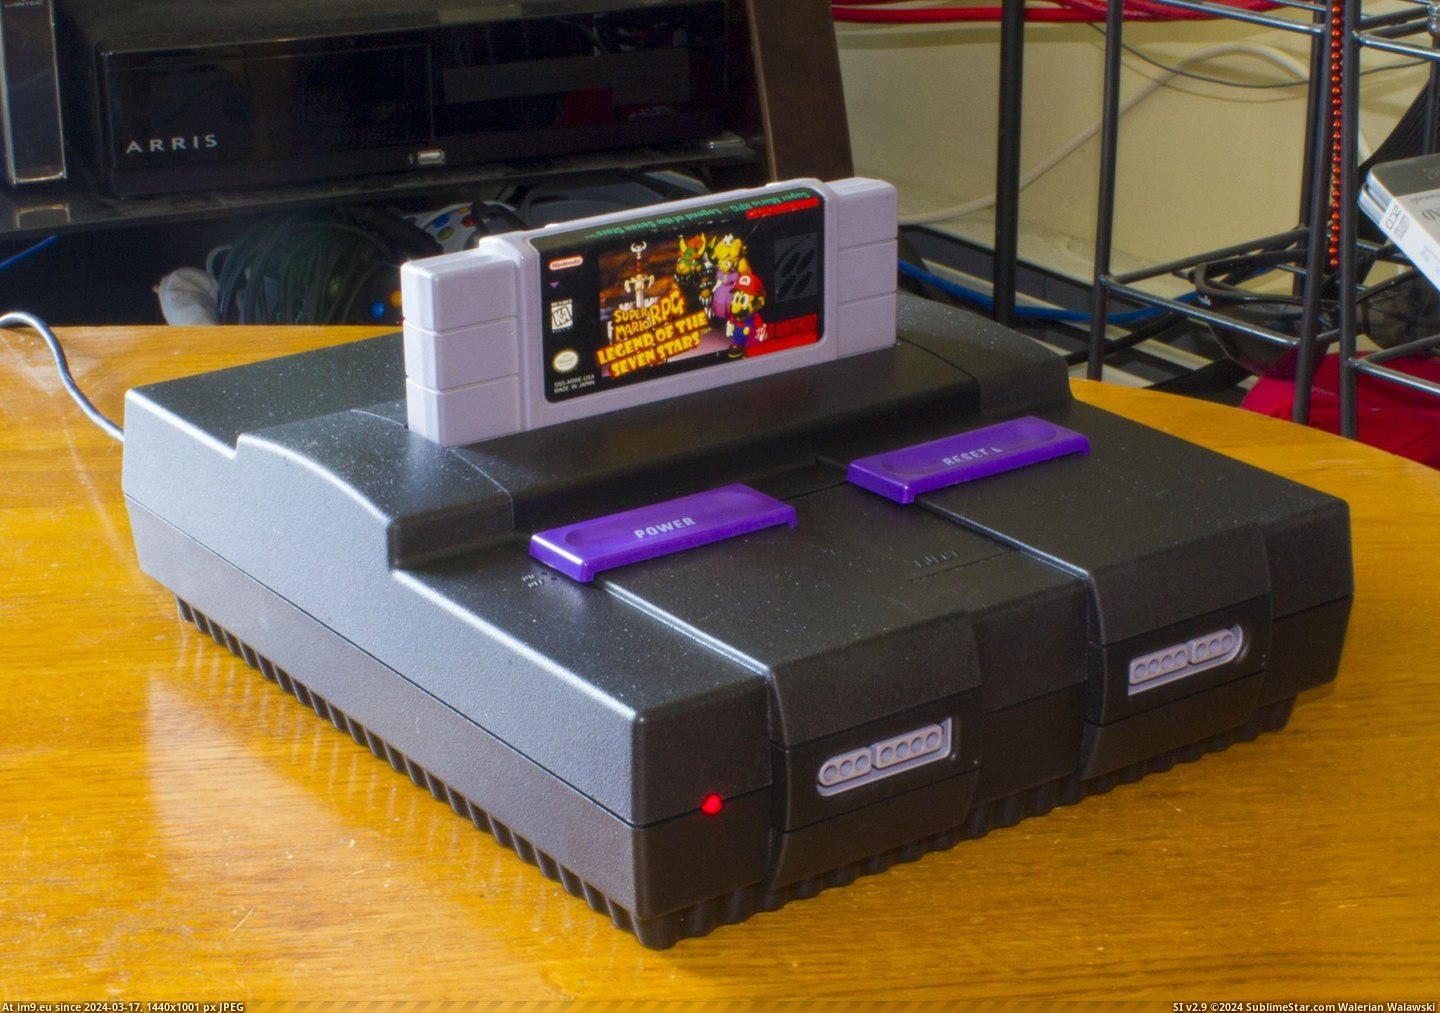 #Gaming #Snes #Black [Gaming] The SNES looks much better in black Pic. (Bild von album My r/GAMING favs))